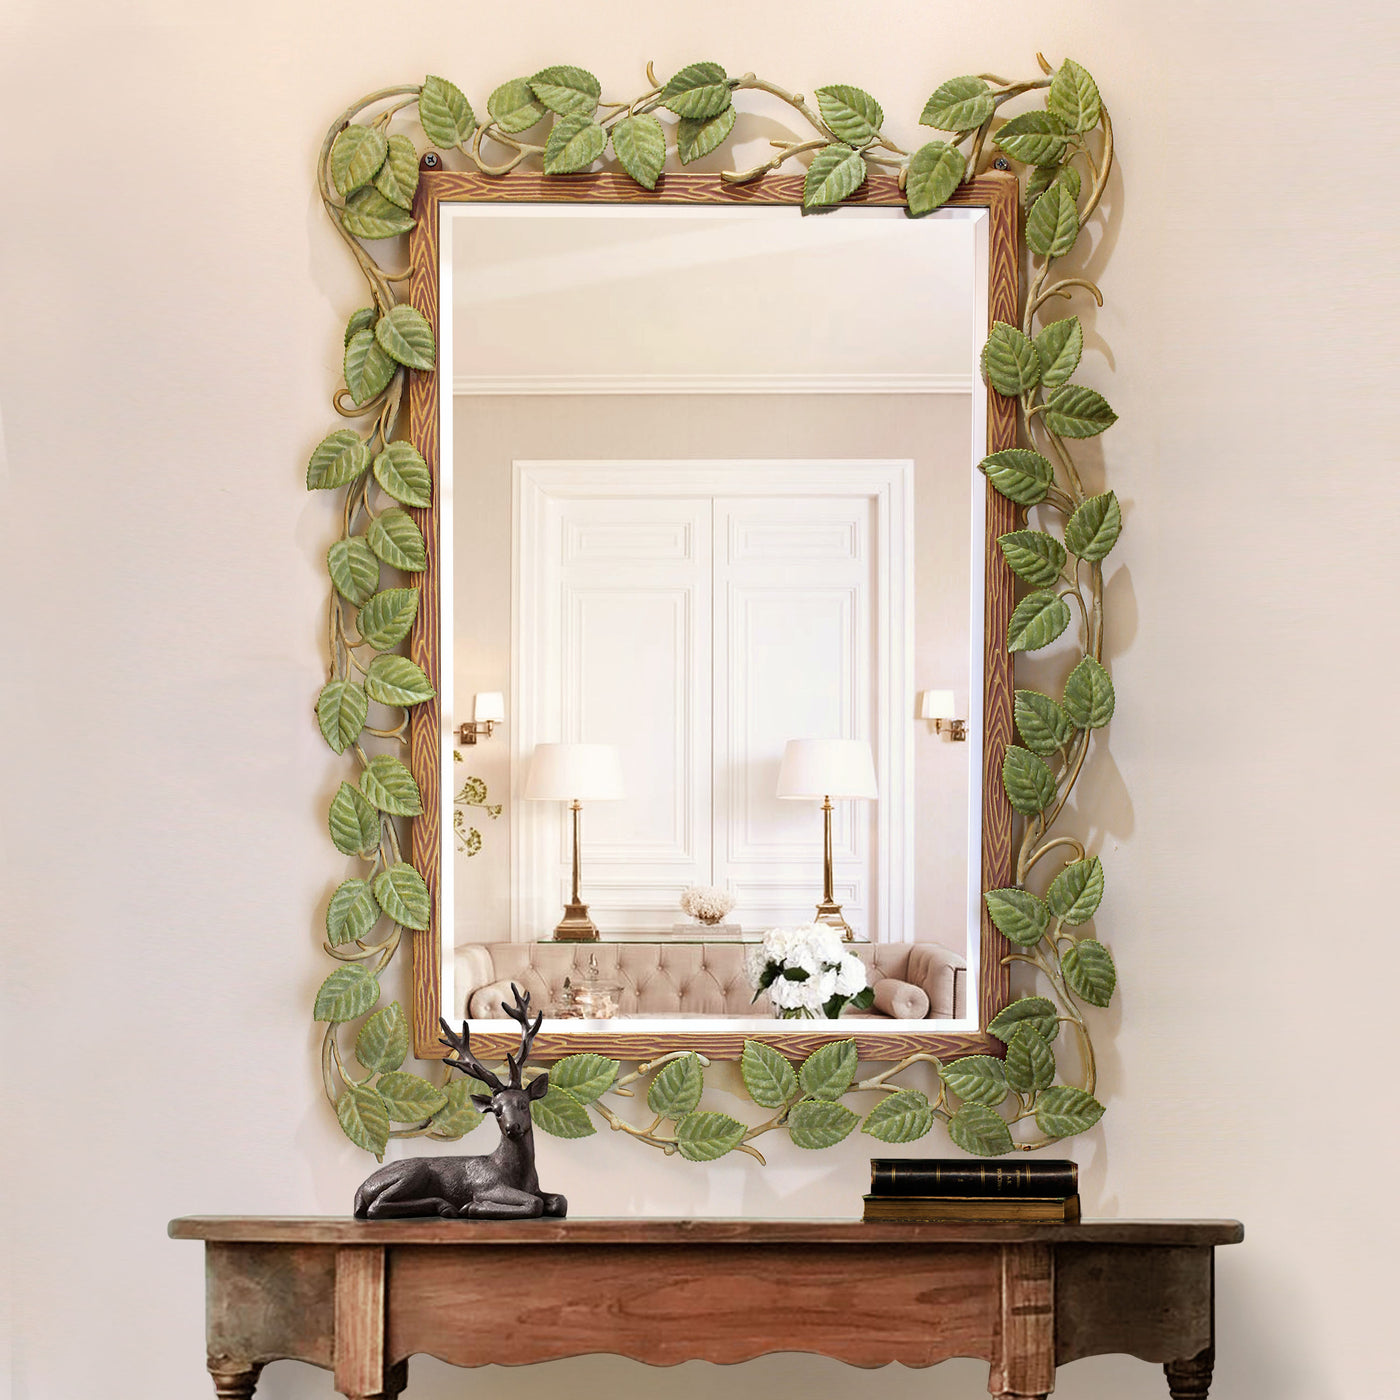 A unique metal rectangular mirror with leaves along its border painted in natural colors; hangs above a console table